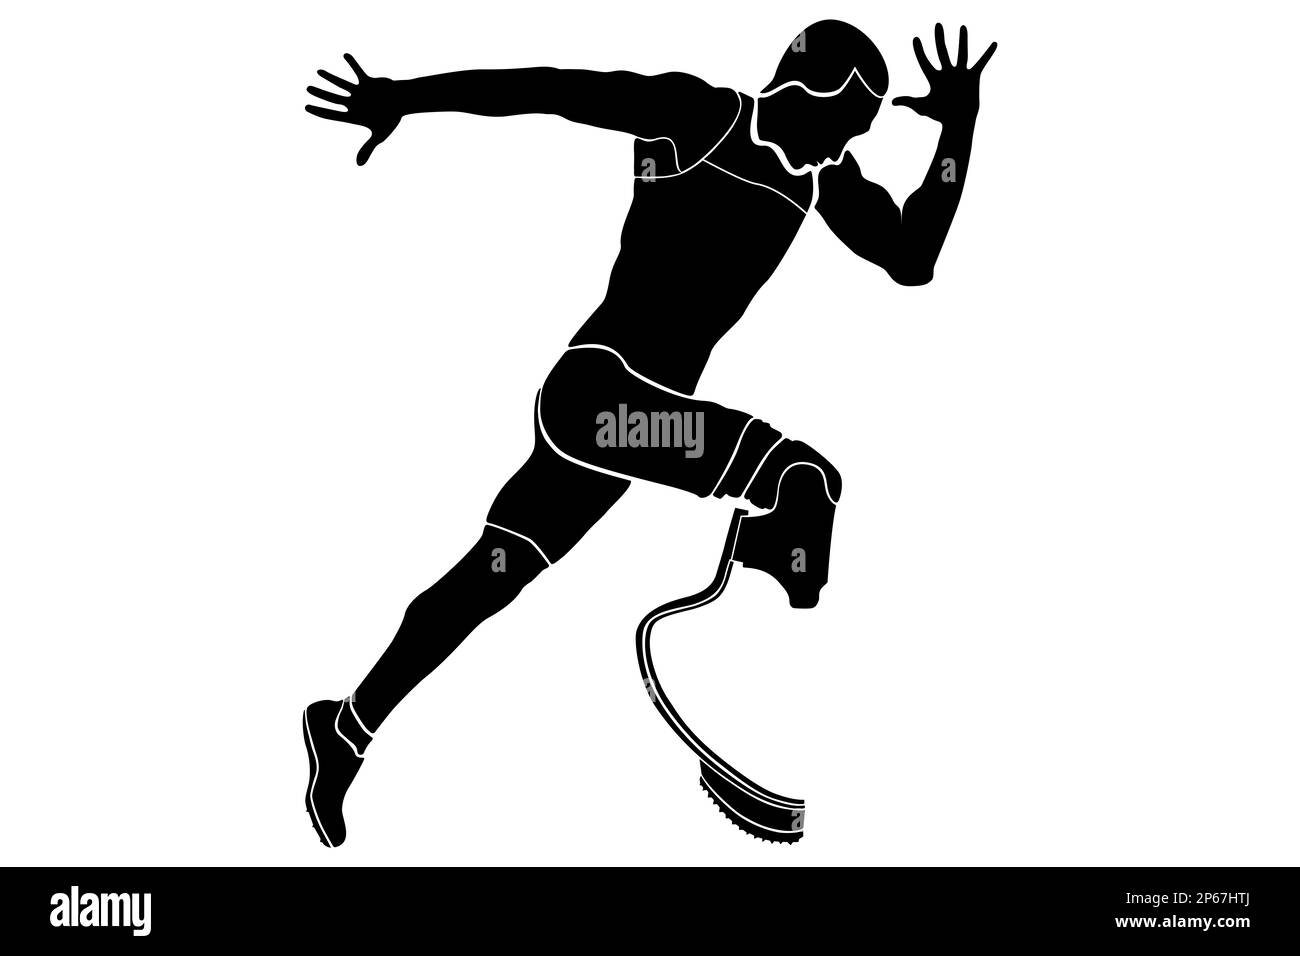 explosive runner athlete disabled amputee black silhouette Stock Photo